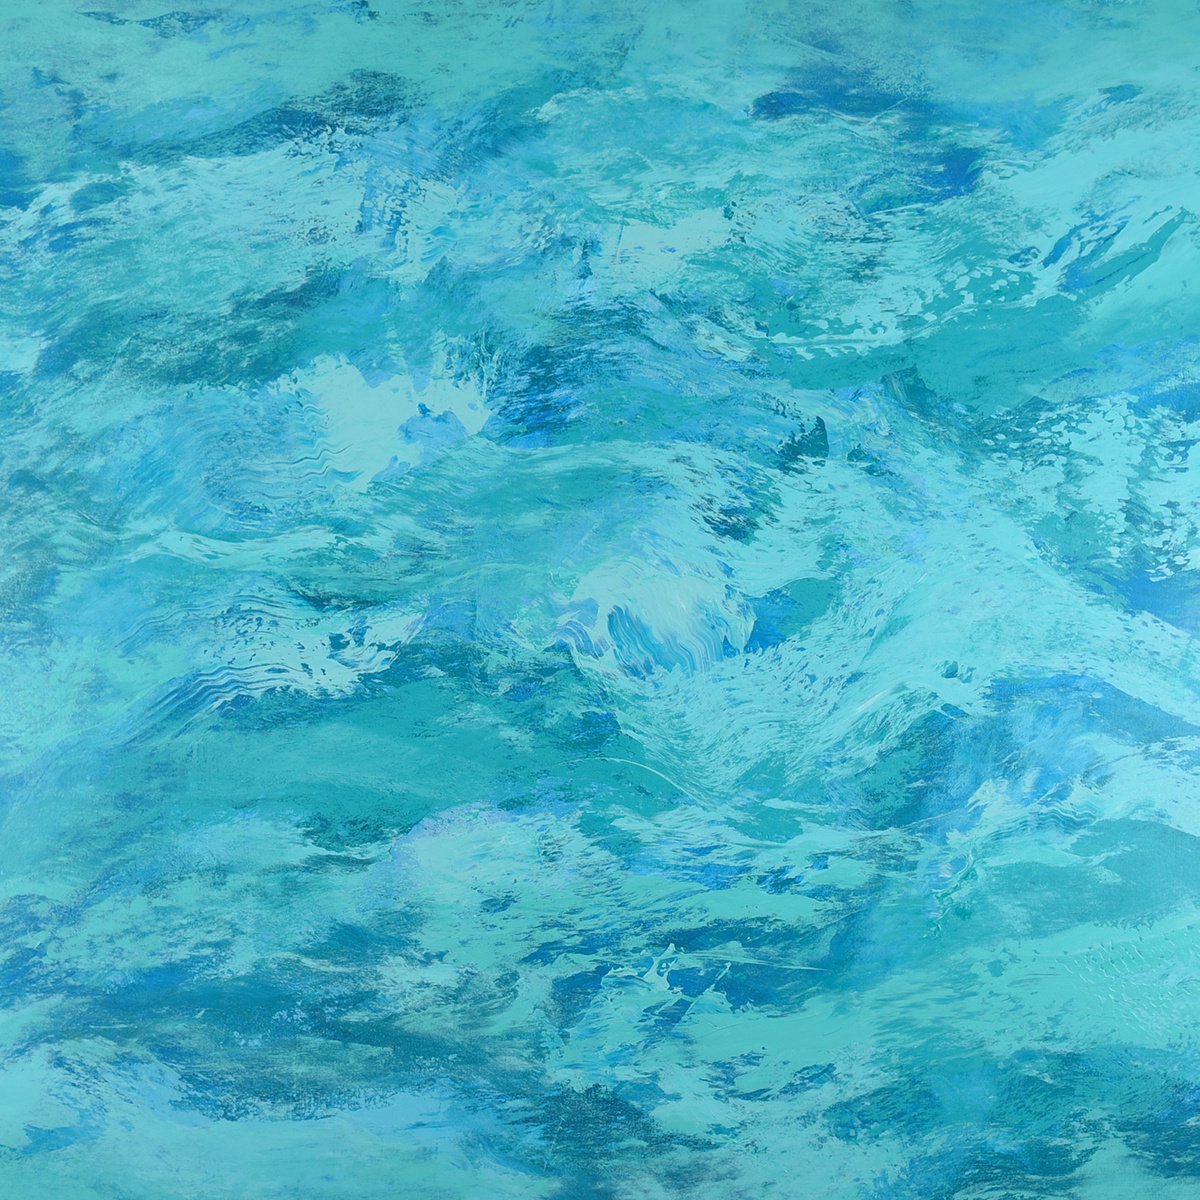 Water Motion - Modern Abstract Expressionist Seascape by Suzanne Vaughan